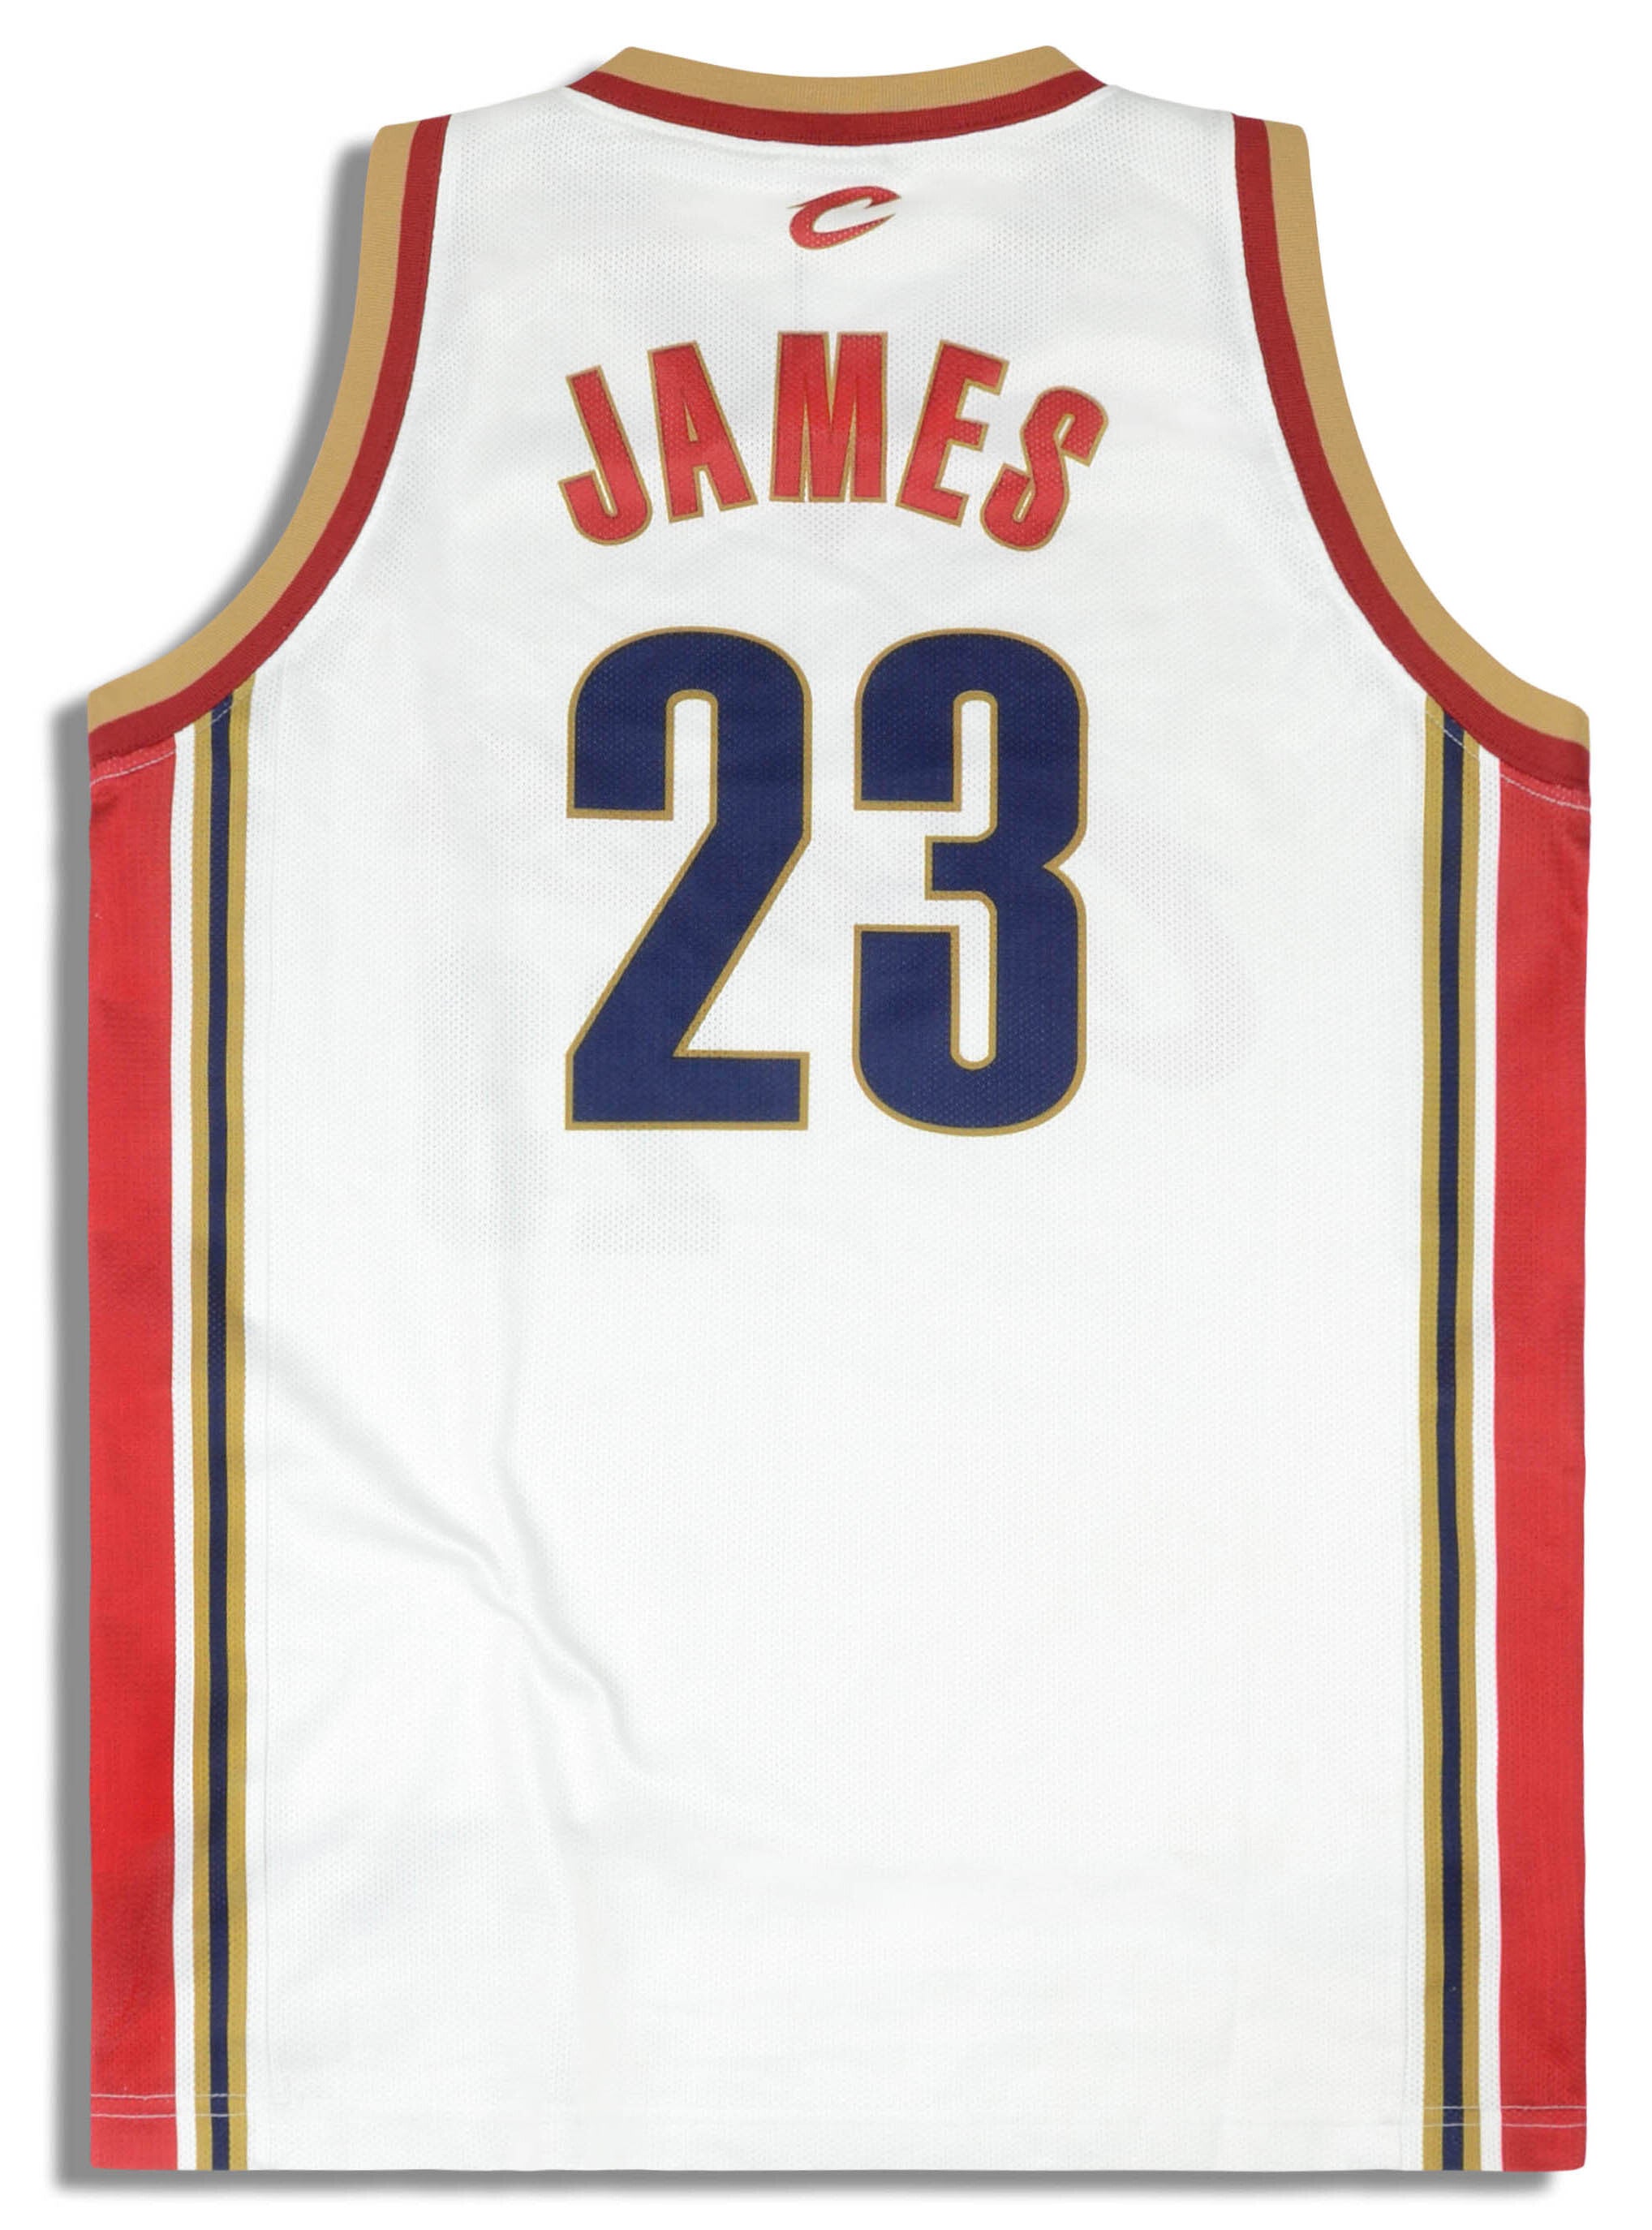 2003-10 CLEVELAND CAVALIERS JAMES #23 CHAMPION JERSEY (HOME) XL